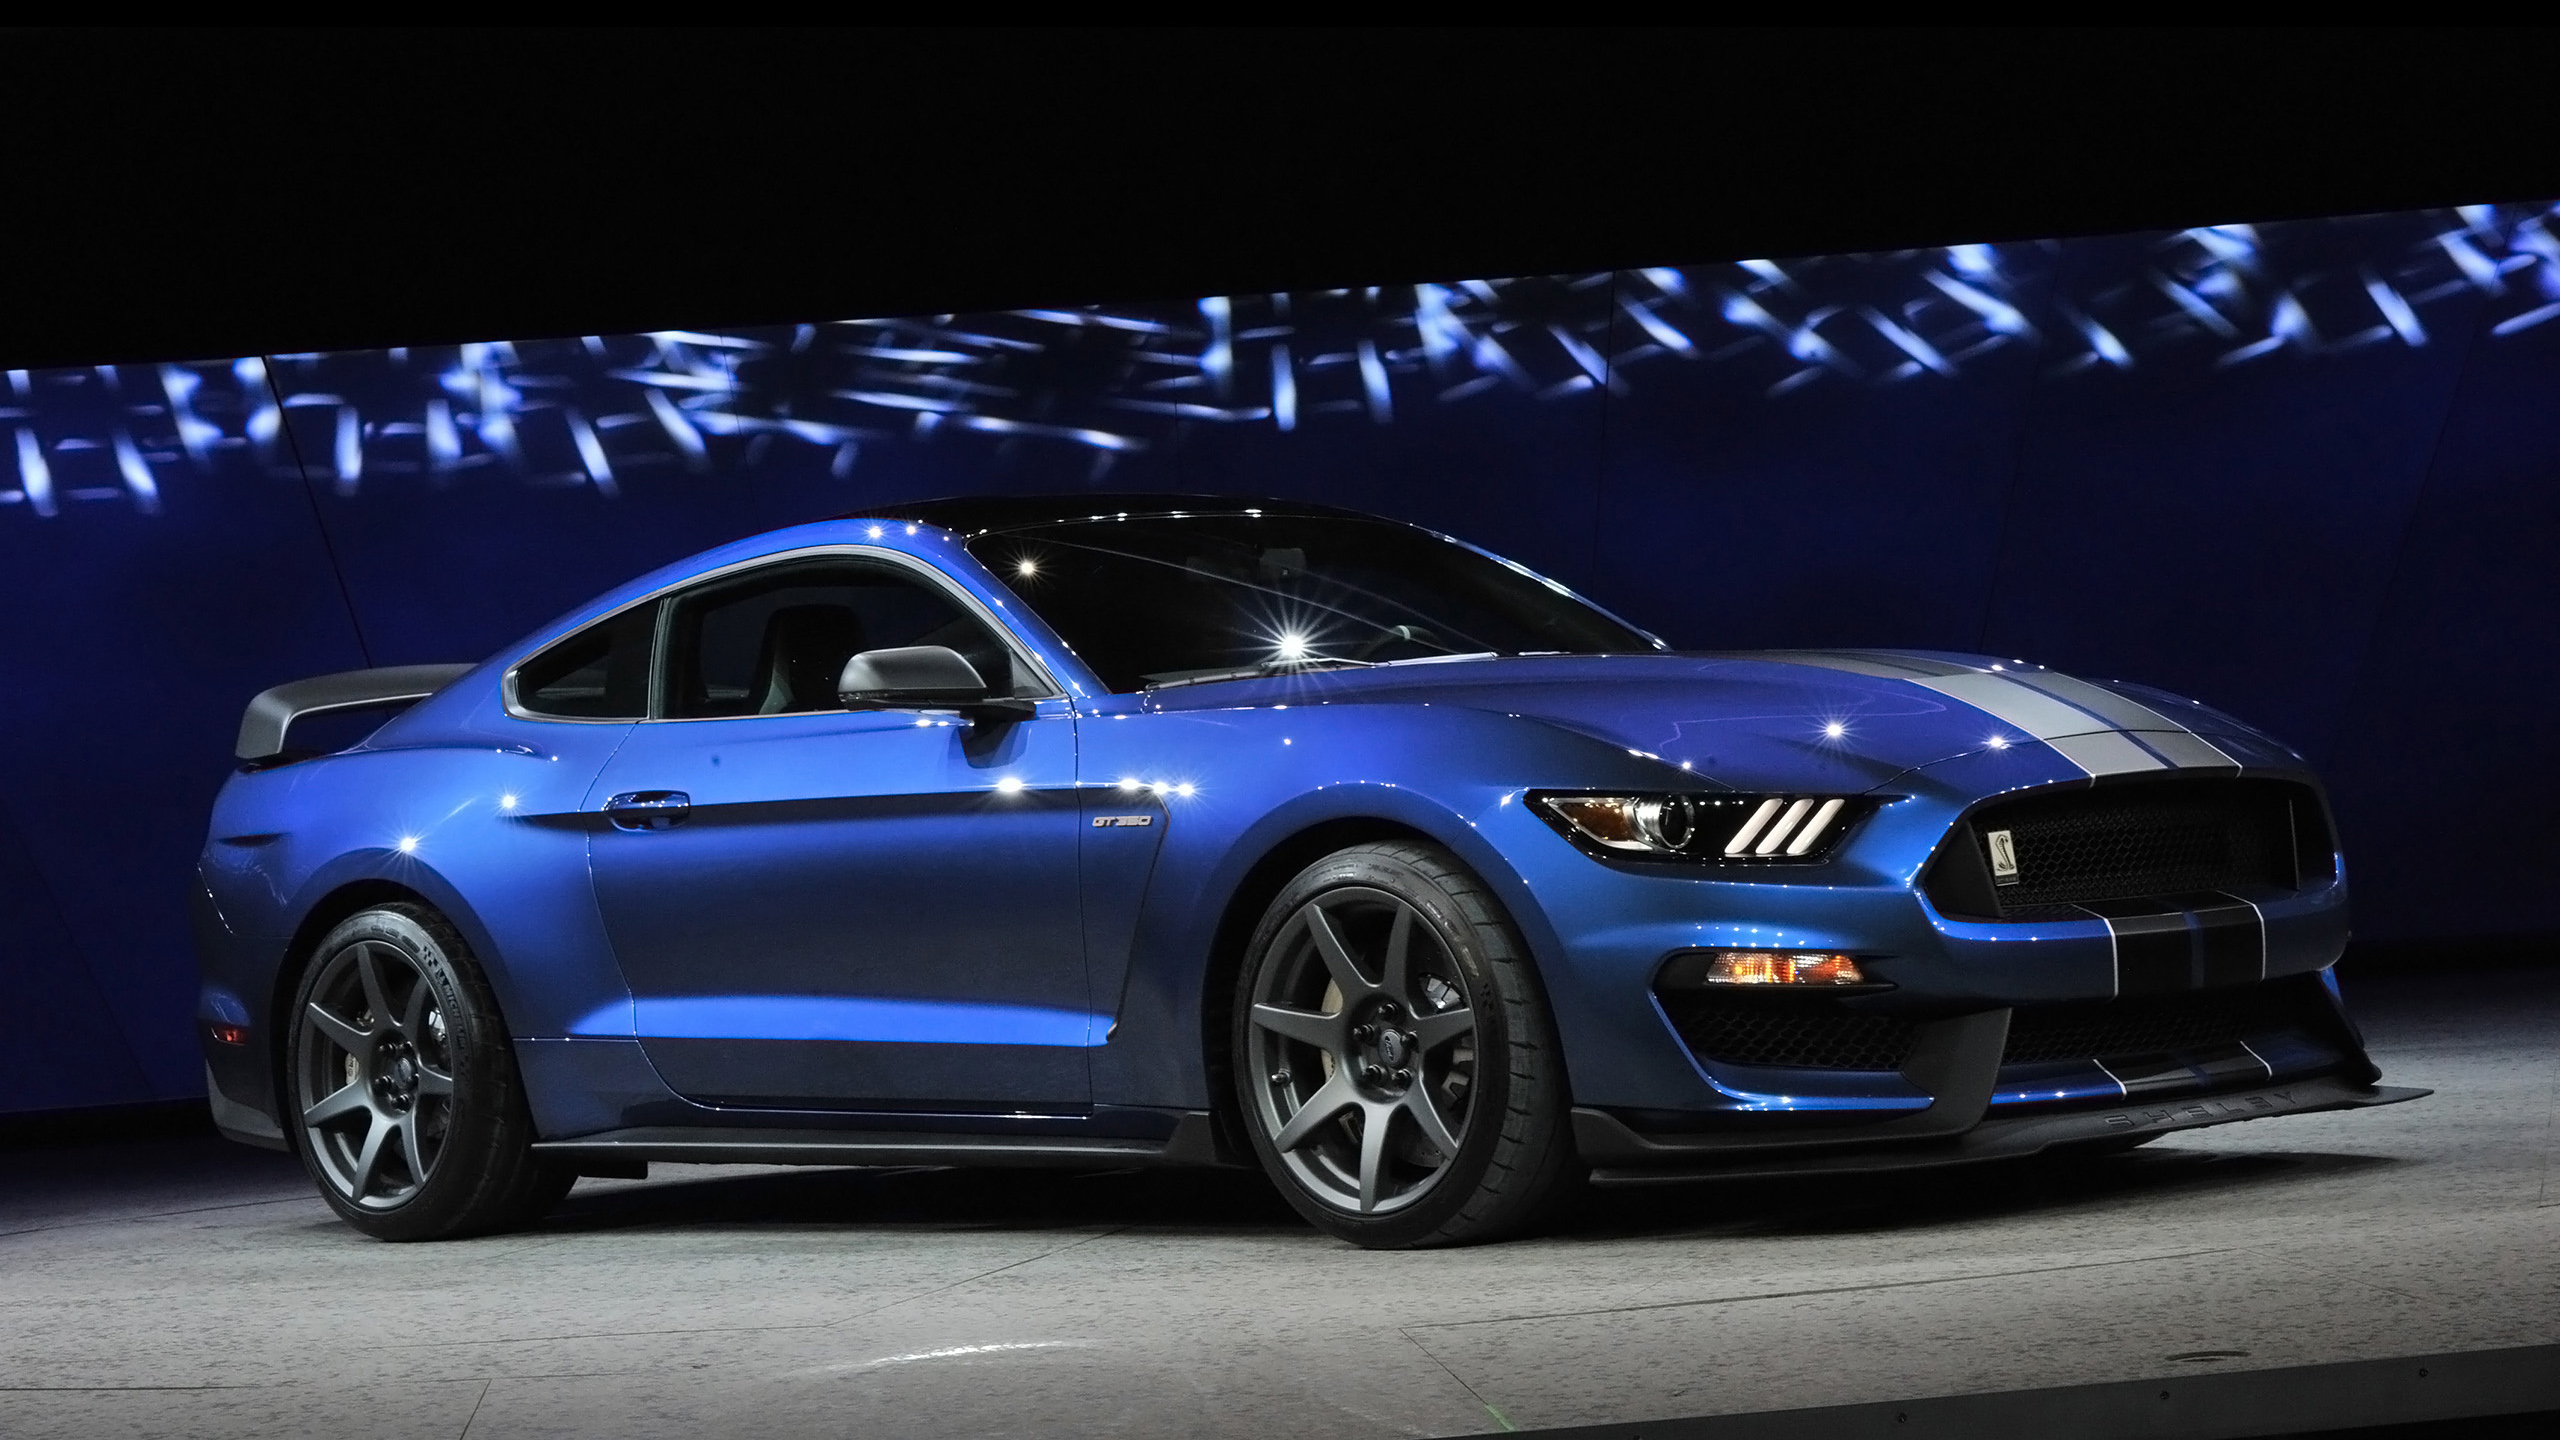 2016 Ford Shelby GT350R Mustang 2 Wallpaper | HD Car Wallpapers | ID #5045